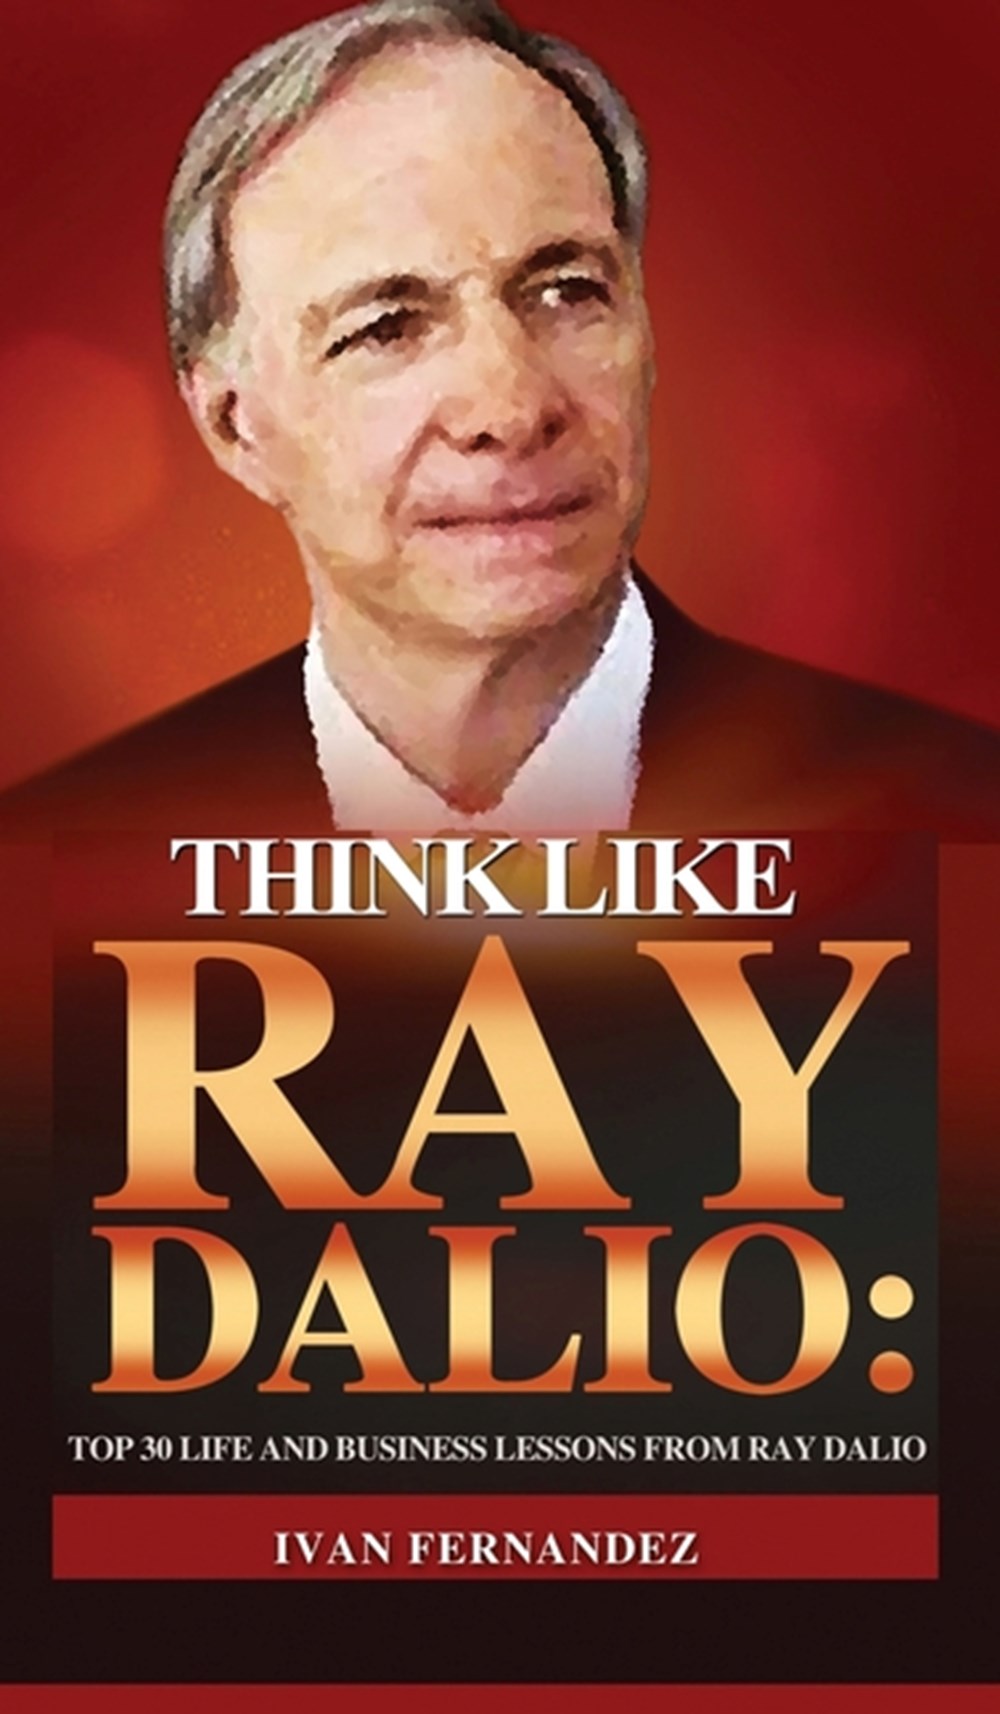 Think Like Ray Dalio: Top 30 Life and Business Lessons from Ray Dalio